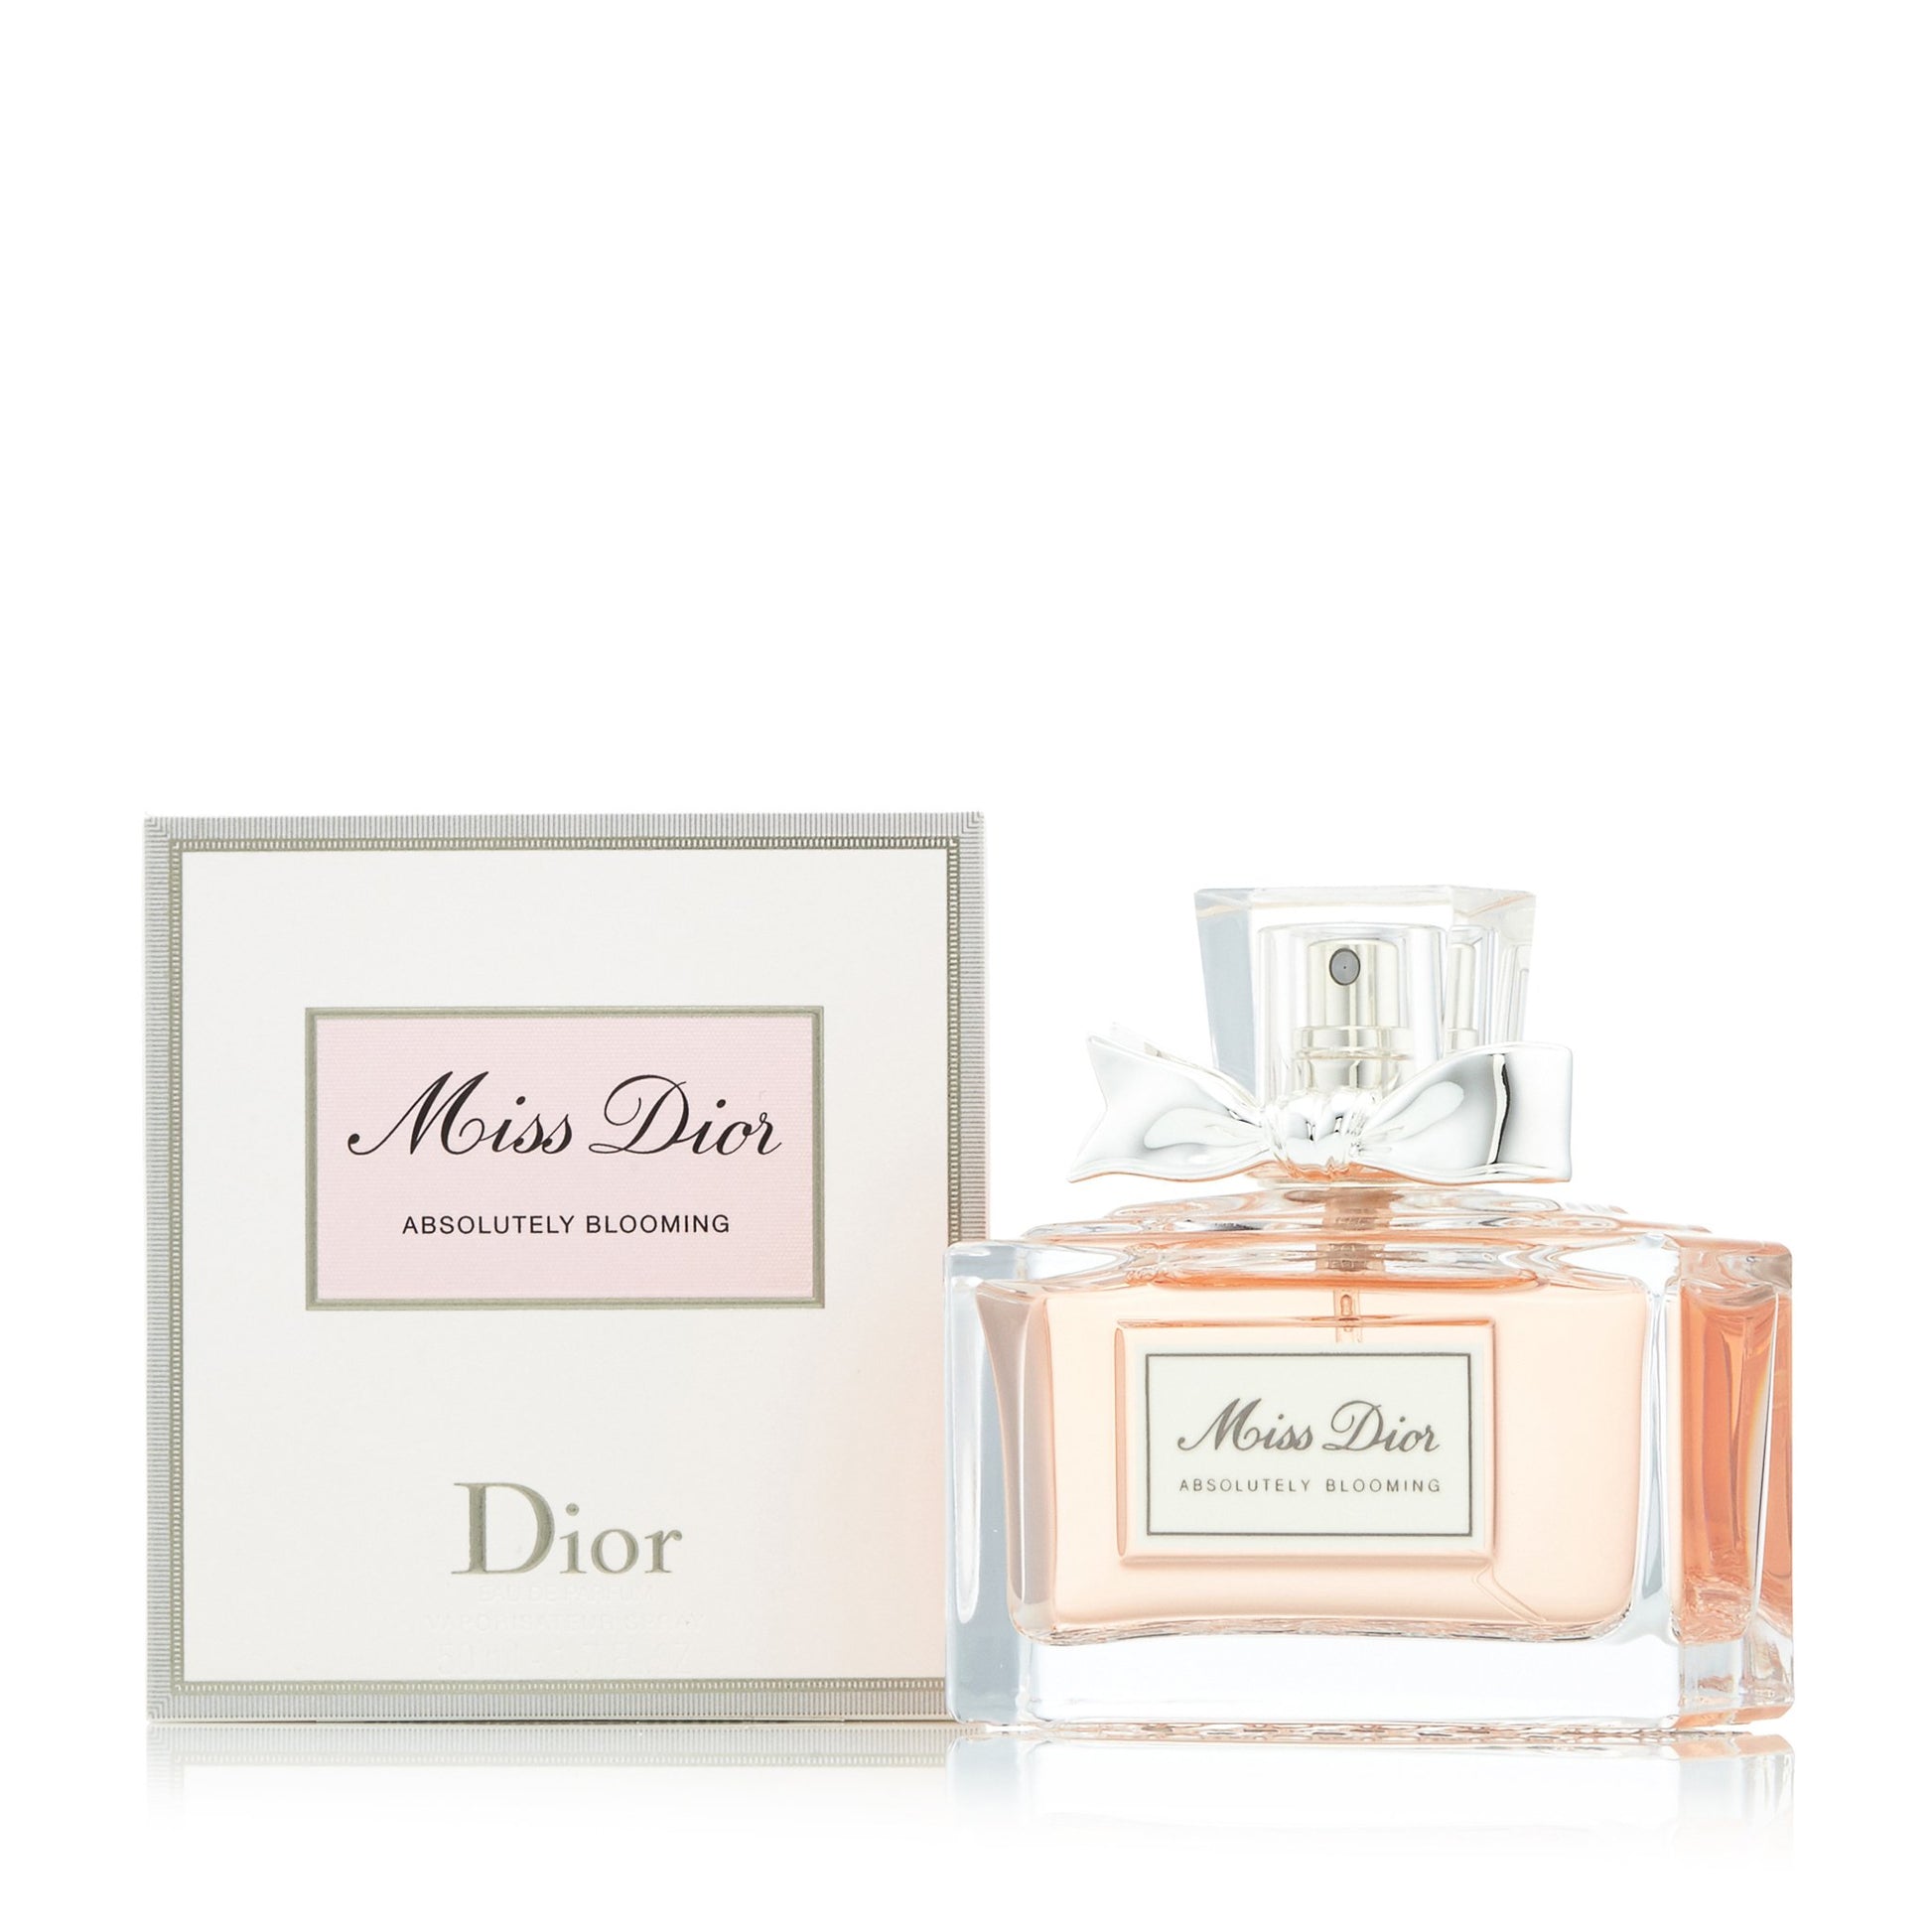 Miss Dior Absolutely Blooming Eau de Parfum Spray for Women by Dior, Product image 4